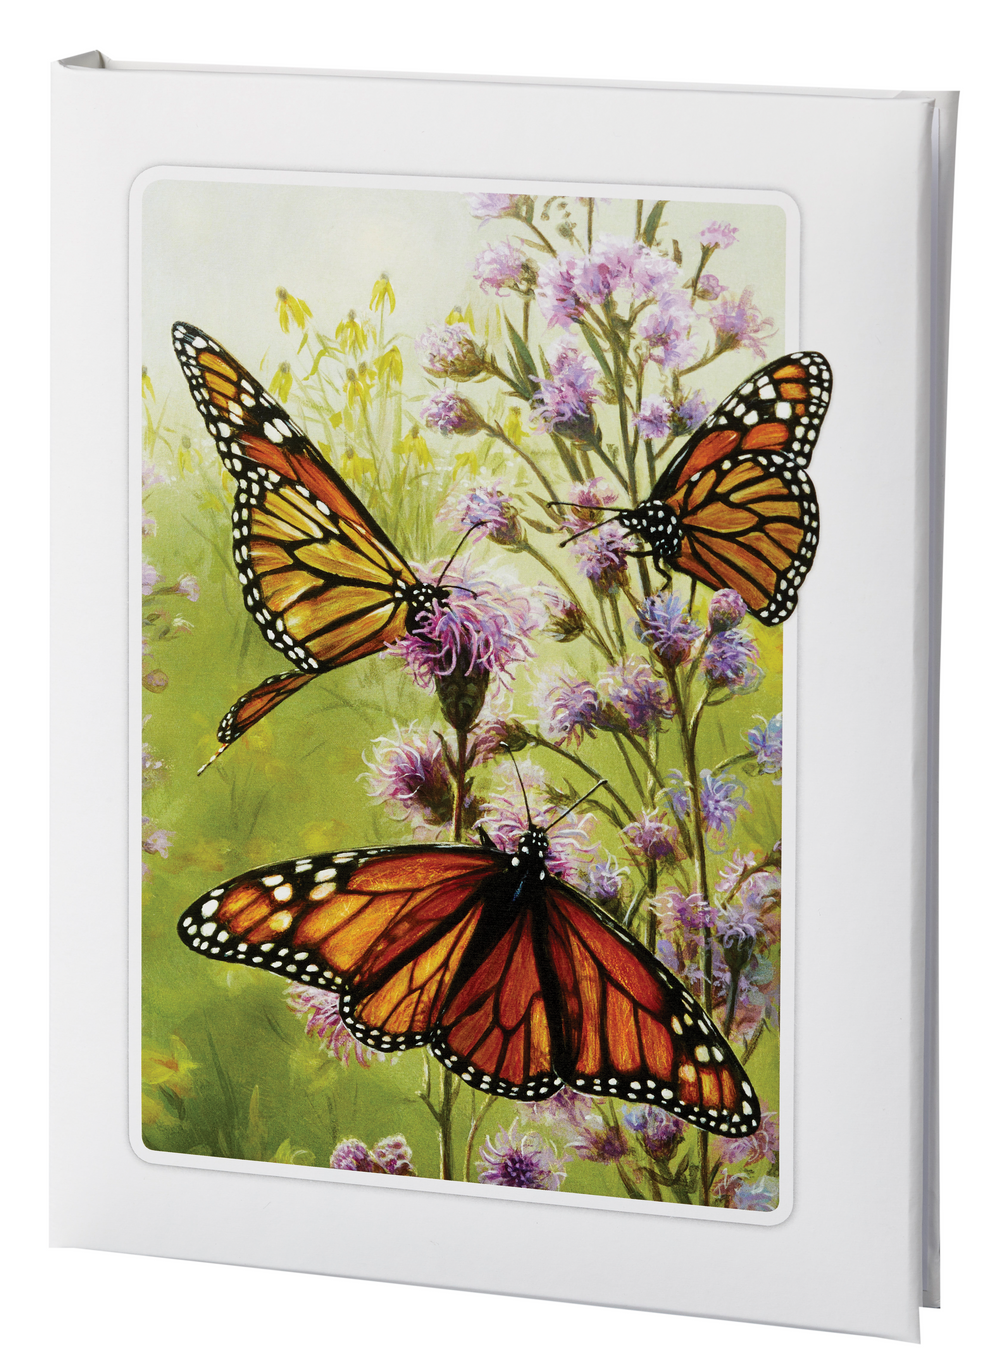 Butterfly Memorial Guest Book - 6 Ring - IUTM116-RBK